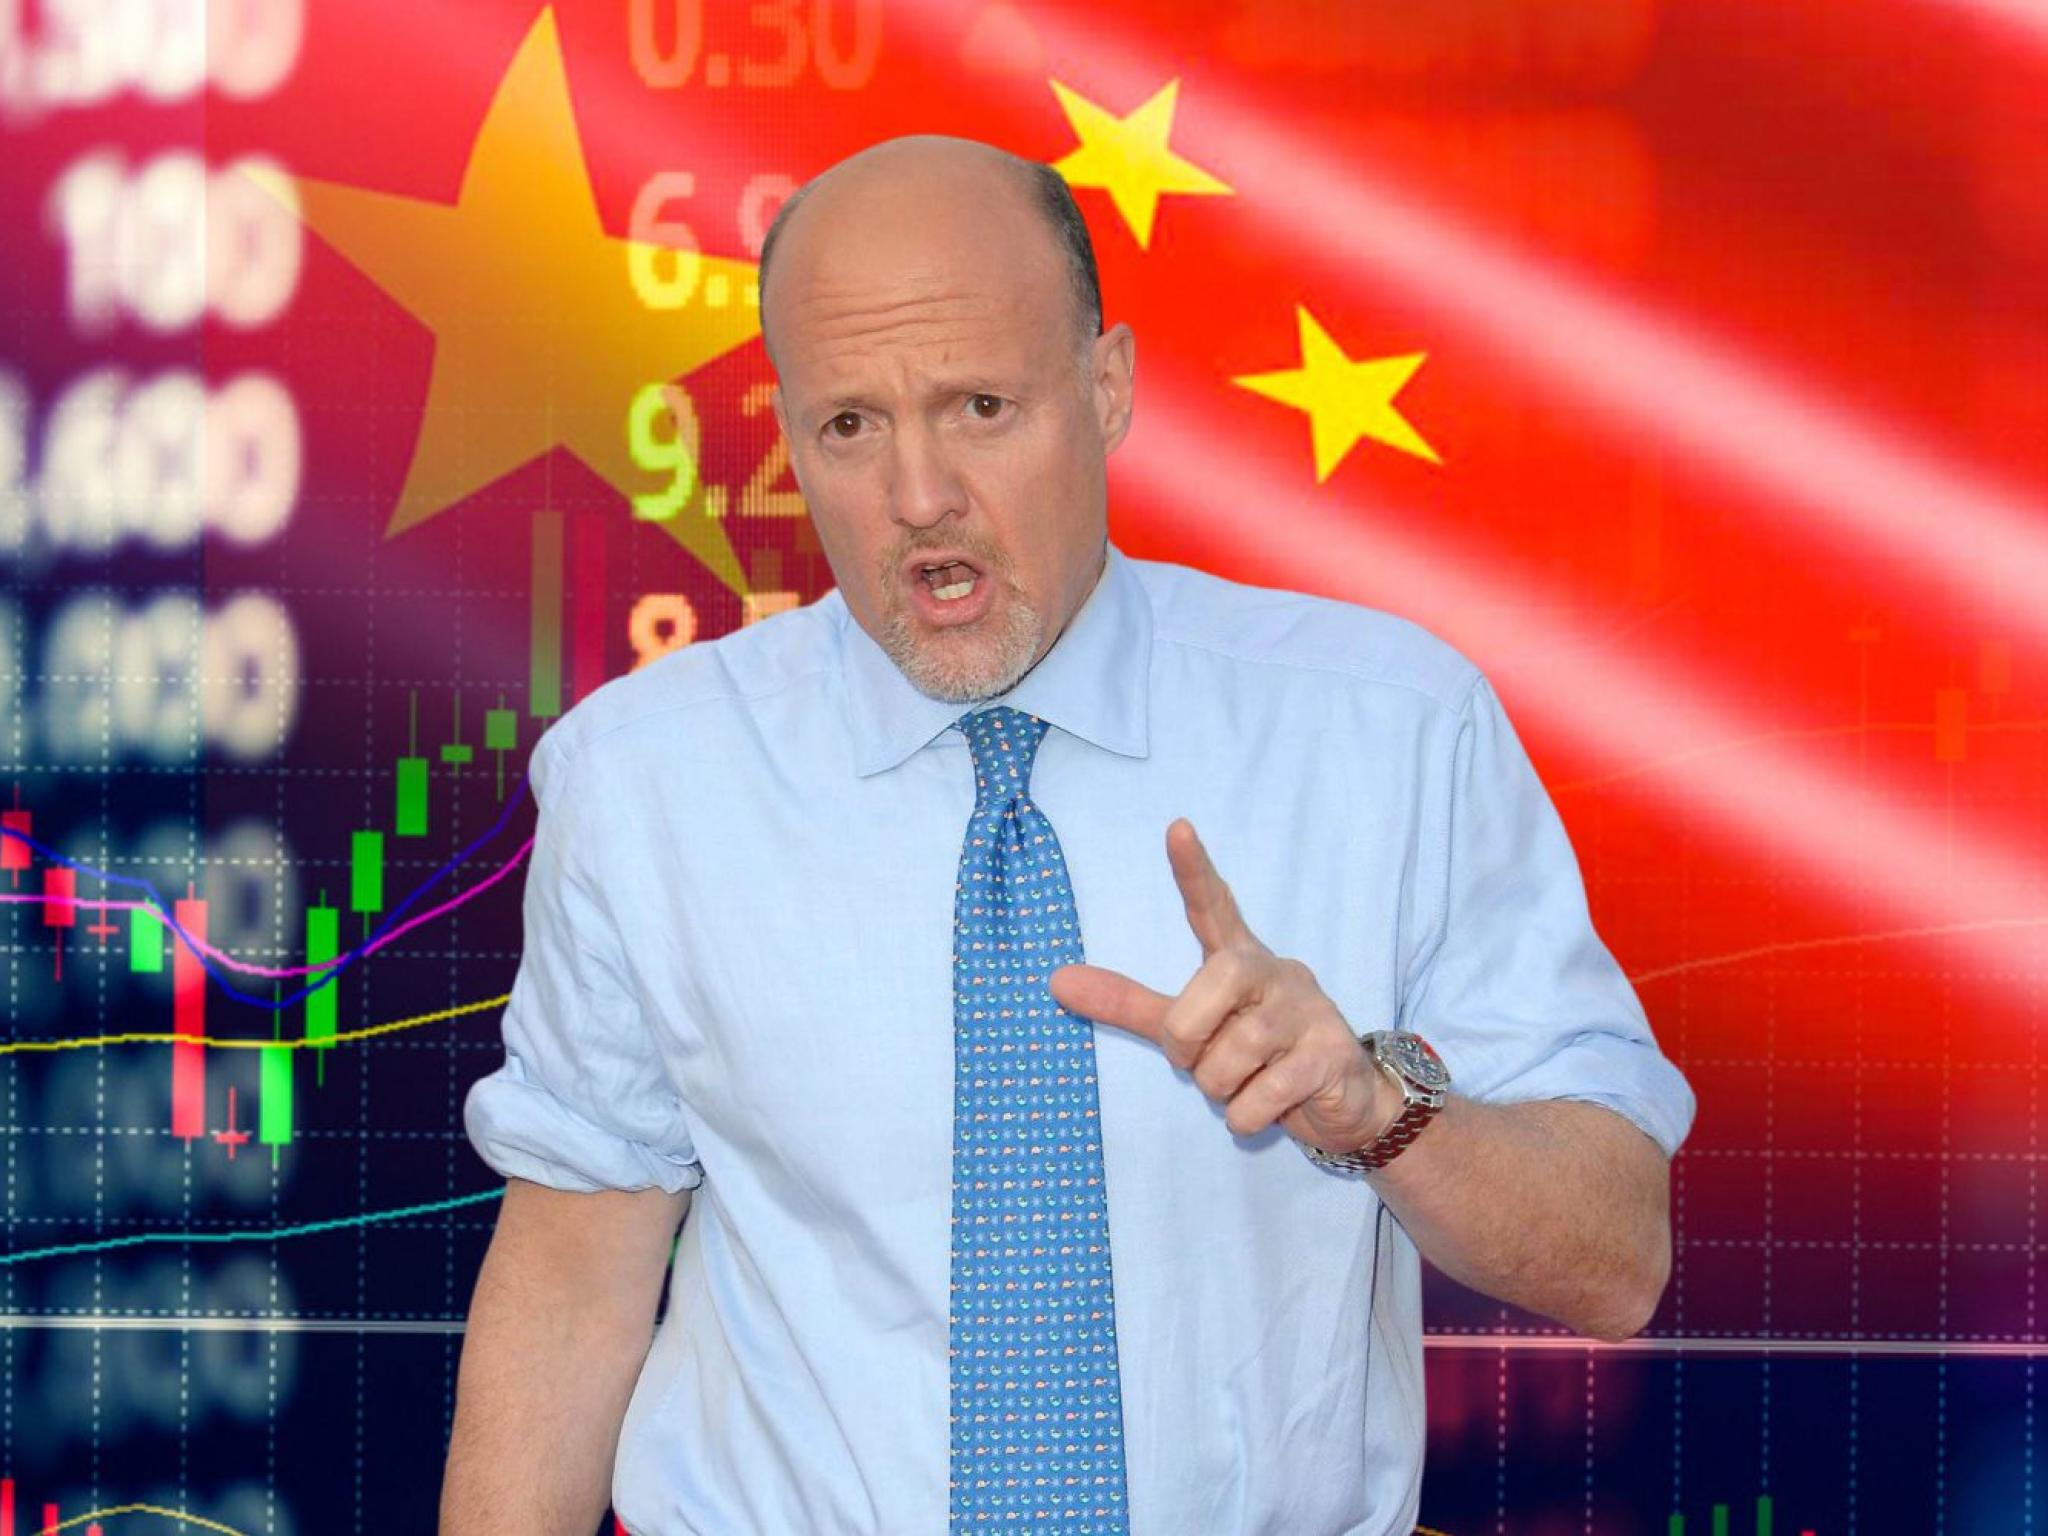  jim-cramer-urges-caution-on-china-investments-only-recommends-alibaba-im-not-that-keen-on-owning-chinese-stocks 